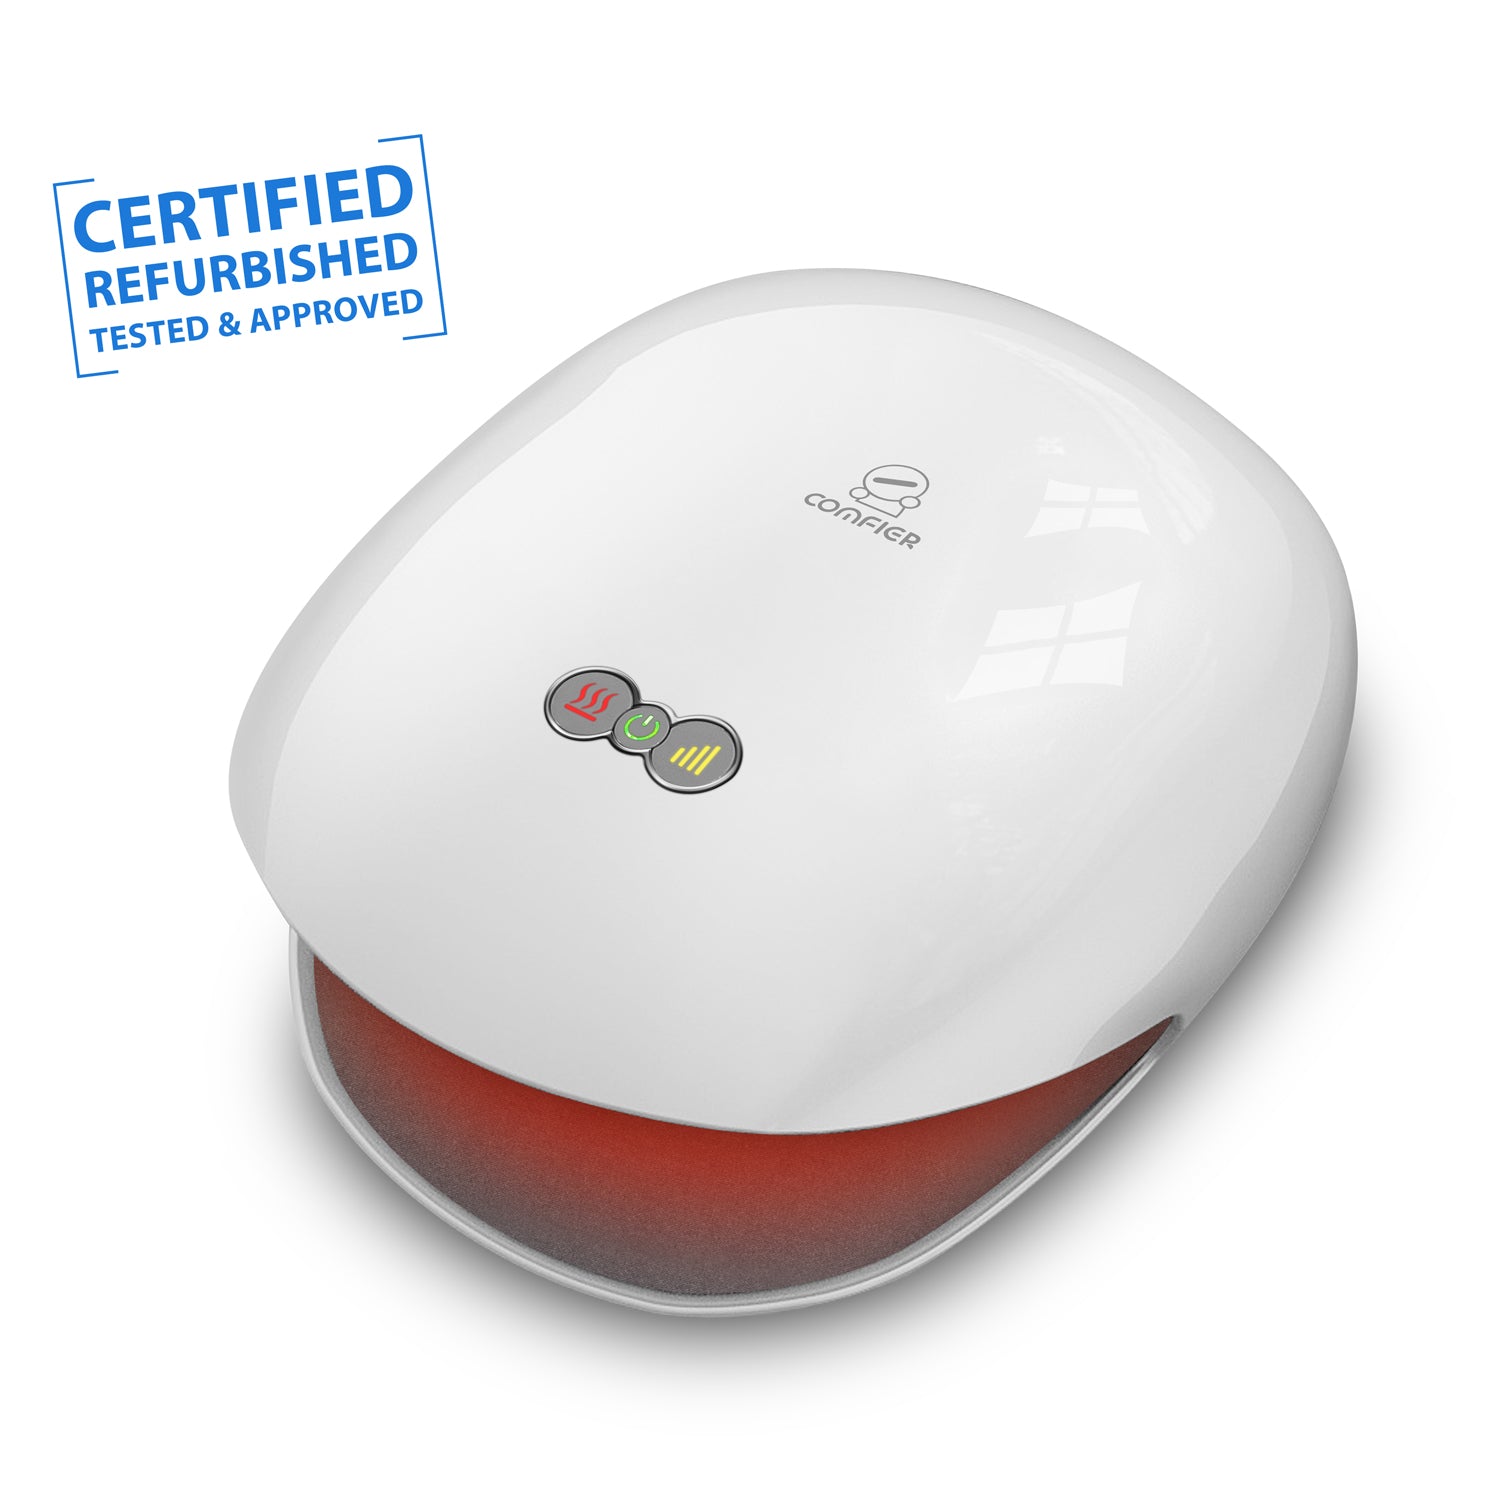 Certified Refurbished - Comfier Wireless Hand Massager with Heat for Carpal Tunnel,Ideal Gifts(White)- 4803-USED